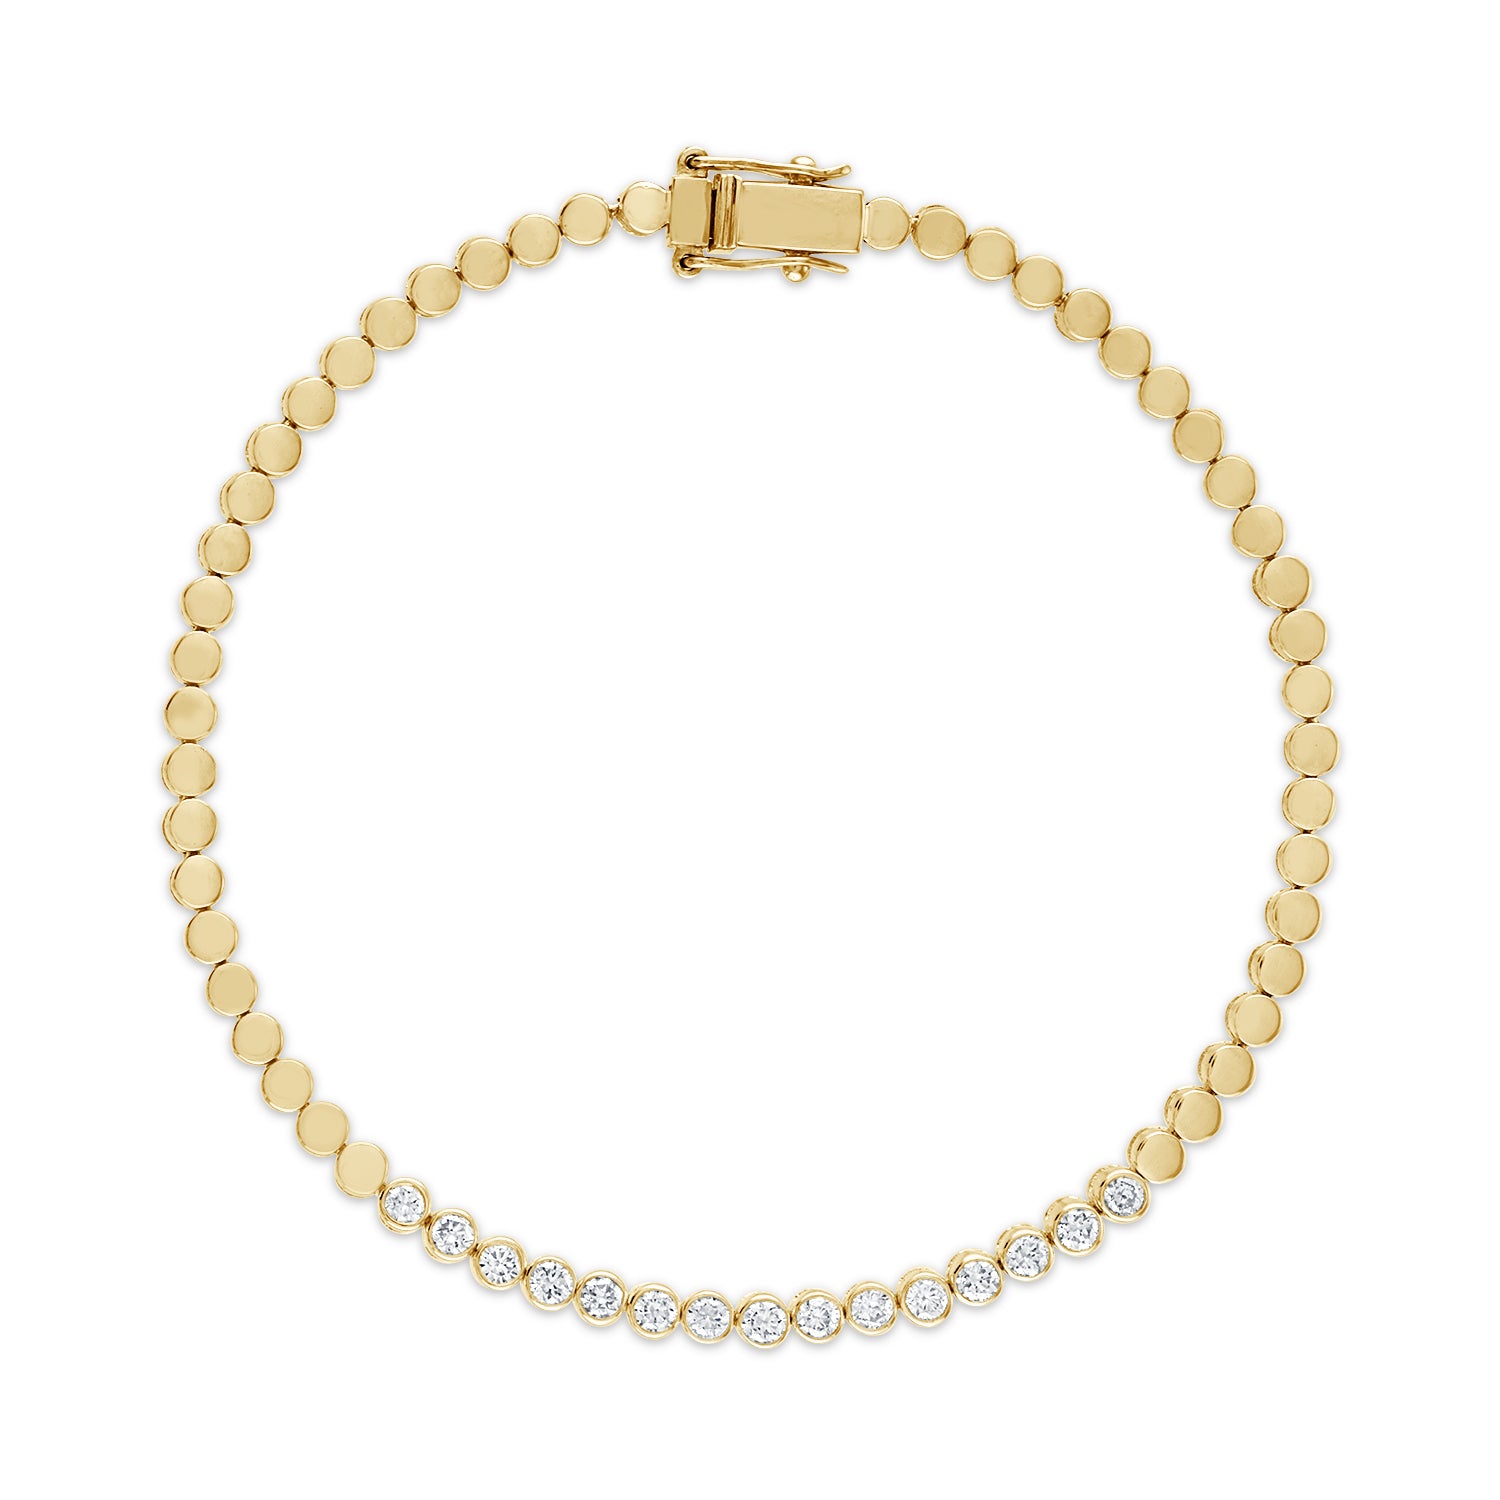 BRACELET WITH TENNIS BALL GOLD PLATED